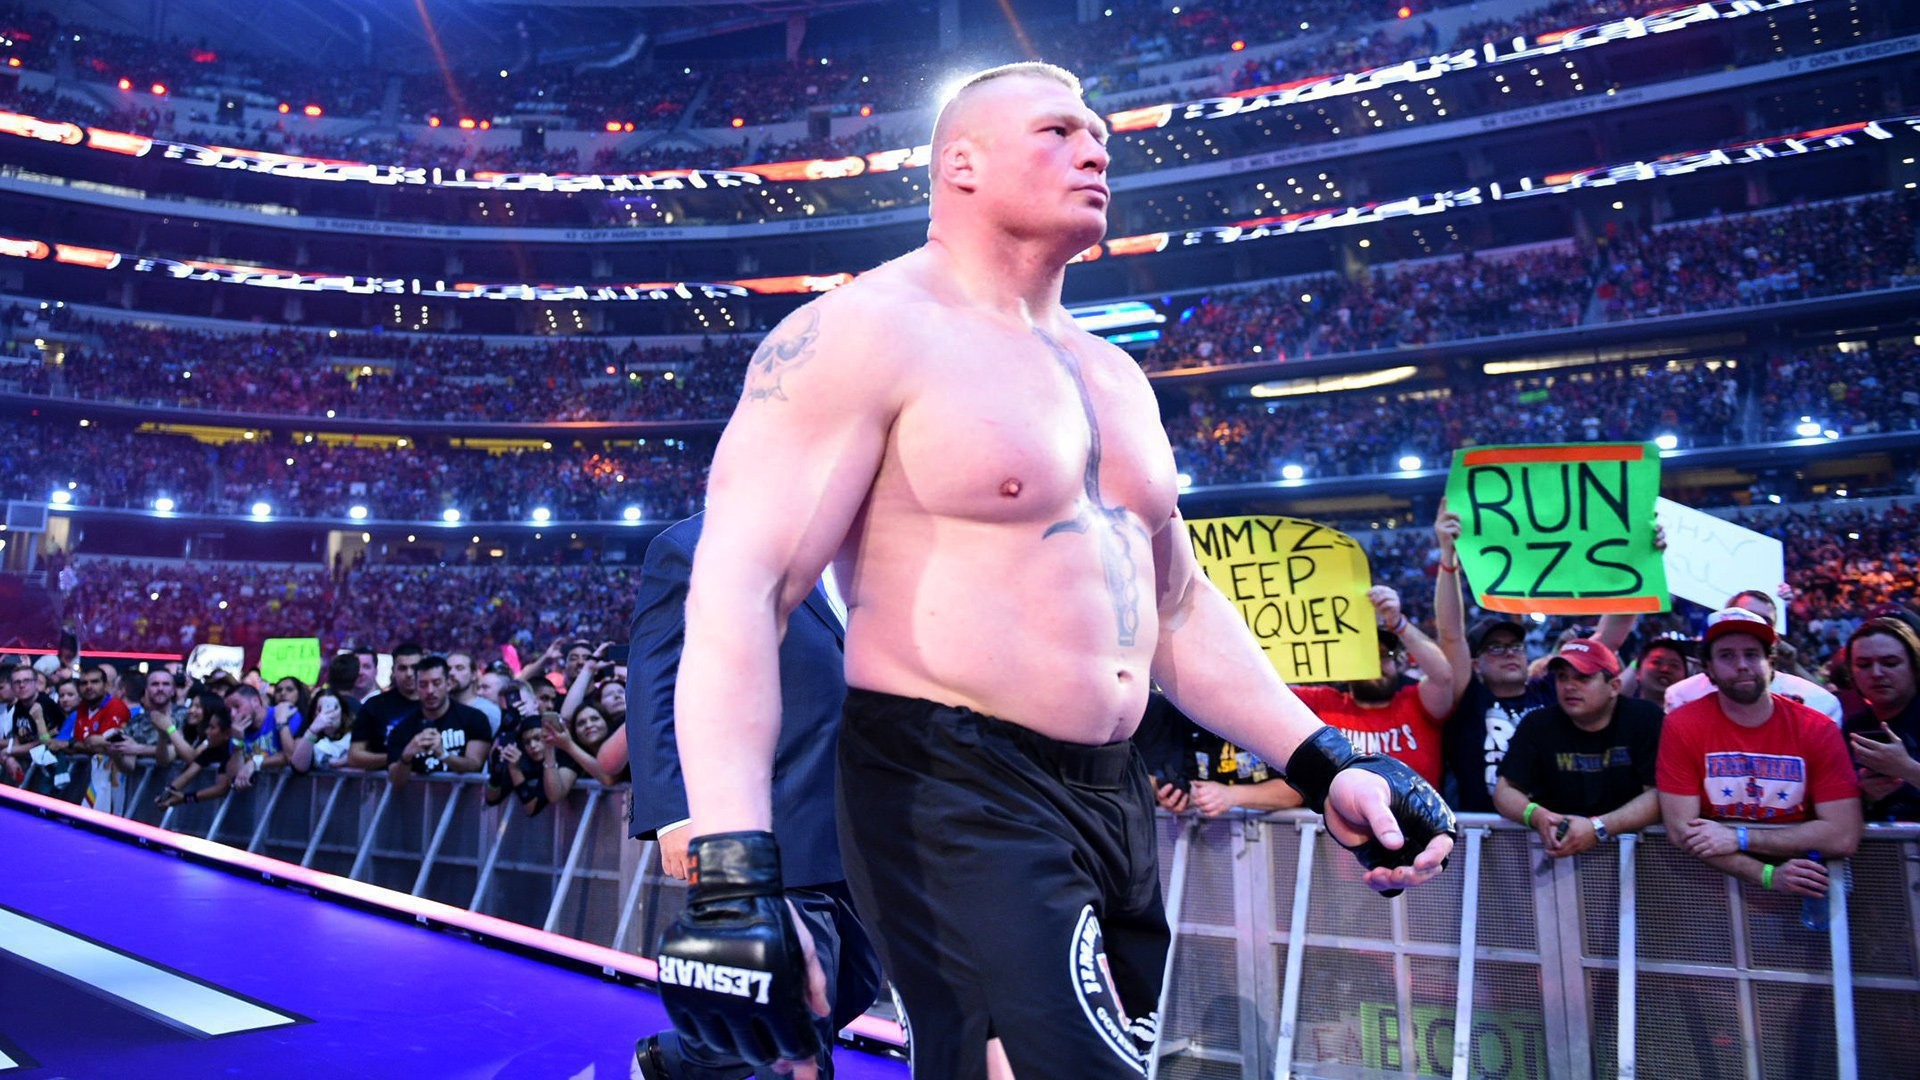 Wwe Superstars And Mma Fighters React To Brock Lesnar - Brock Lesnar Wallpaper 2018 Hd , HD Wallpaper & Backgrounds